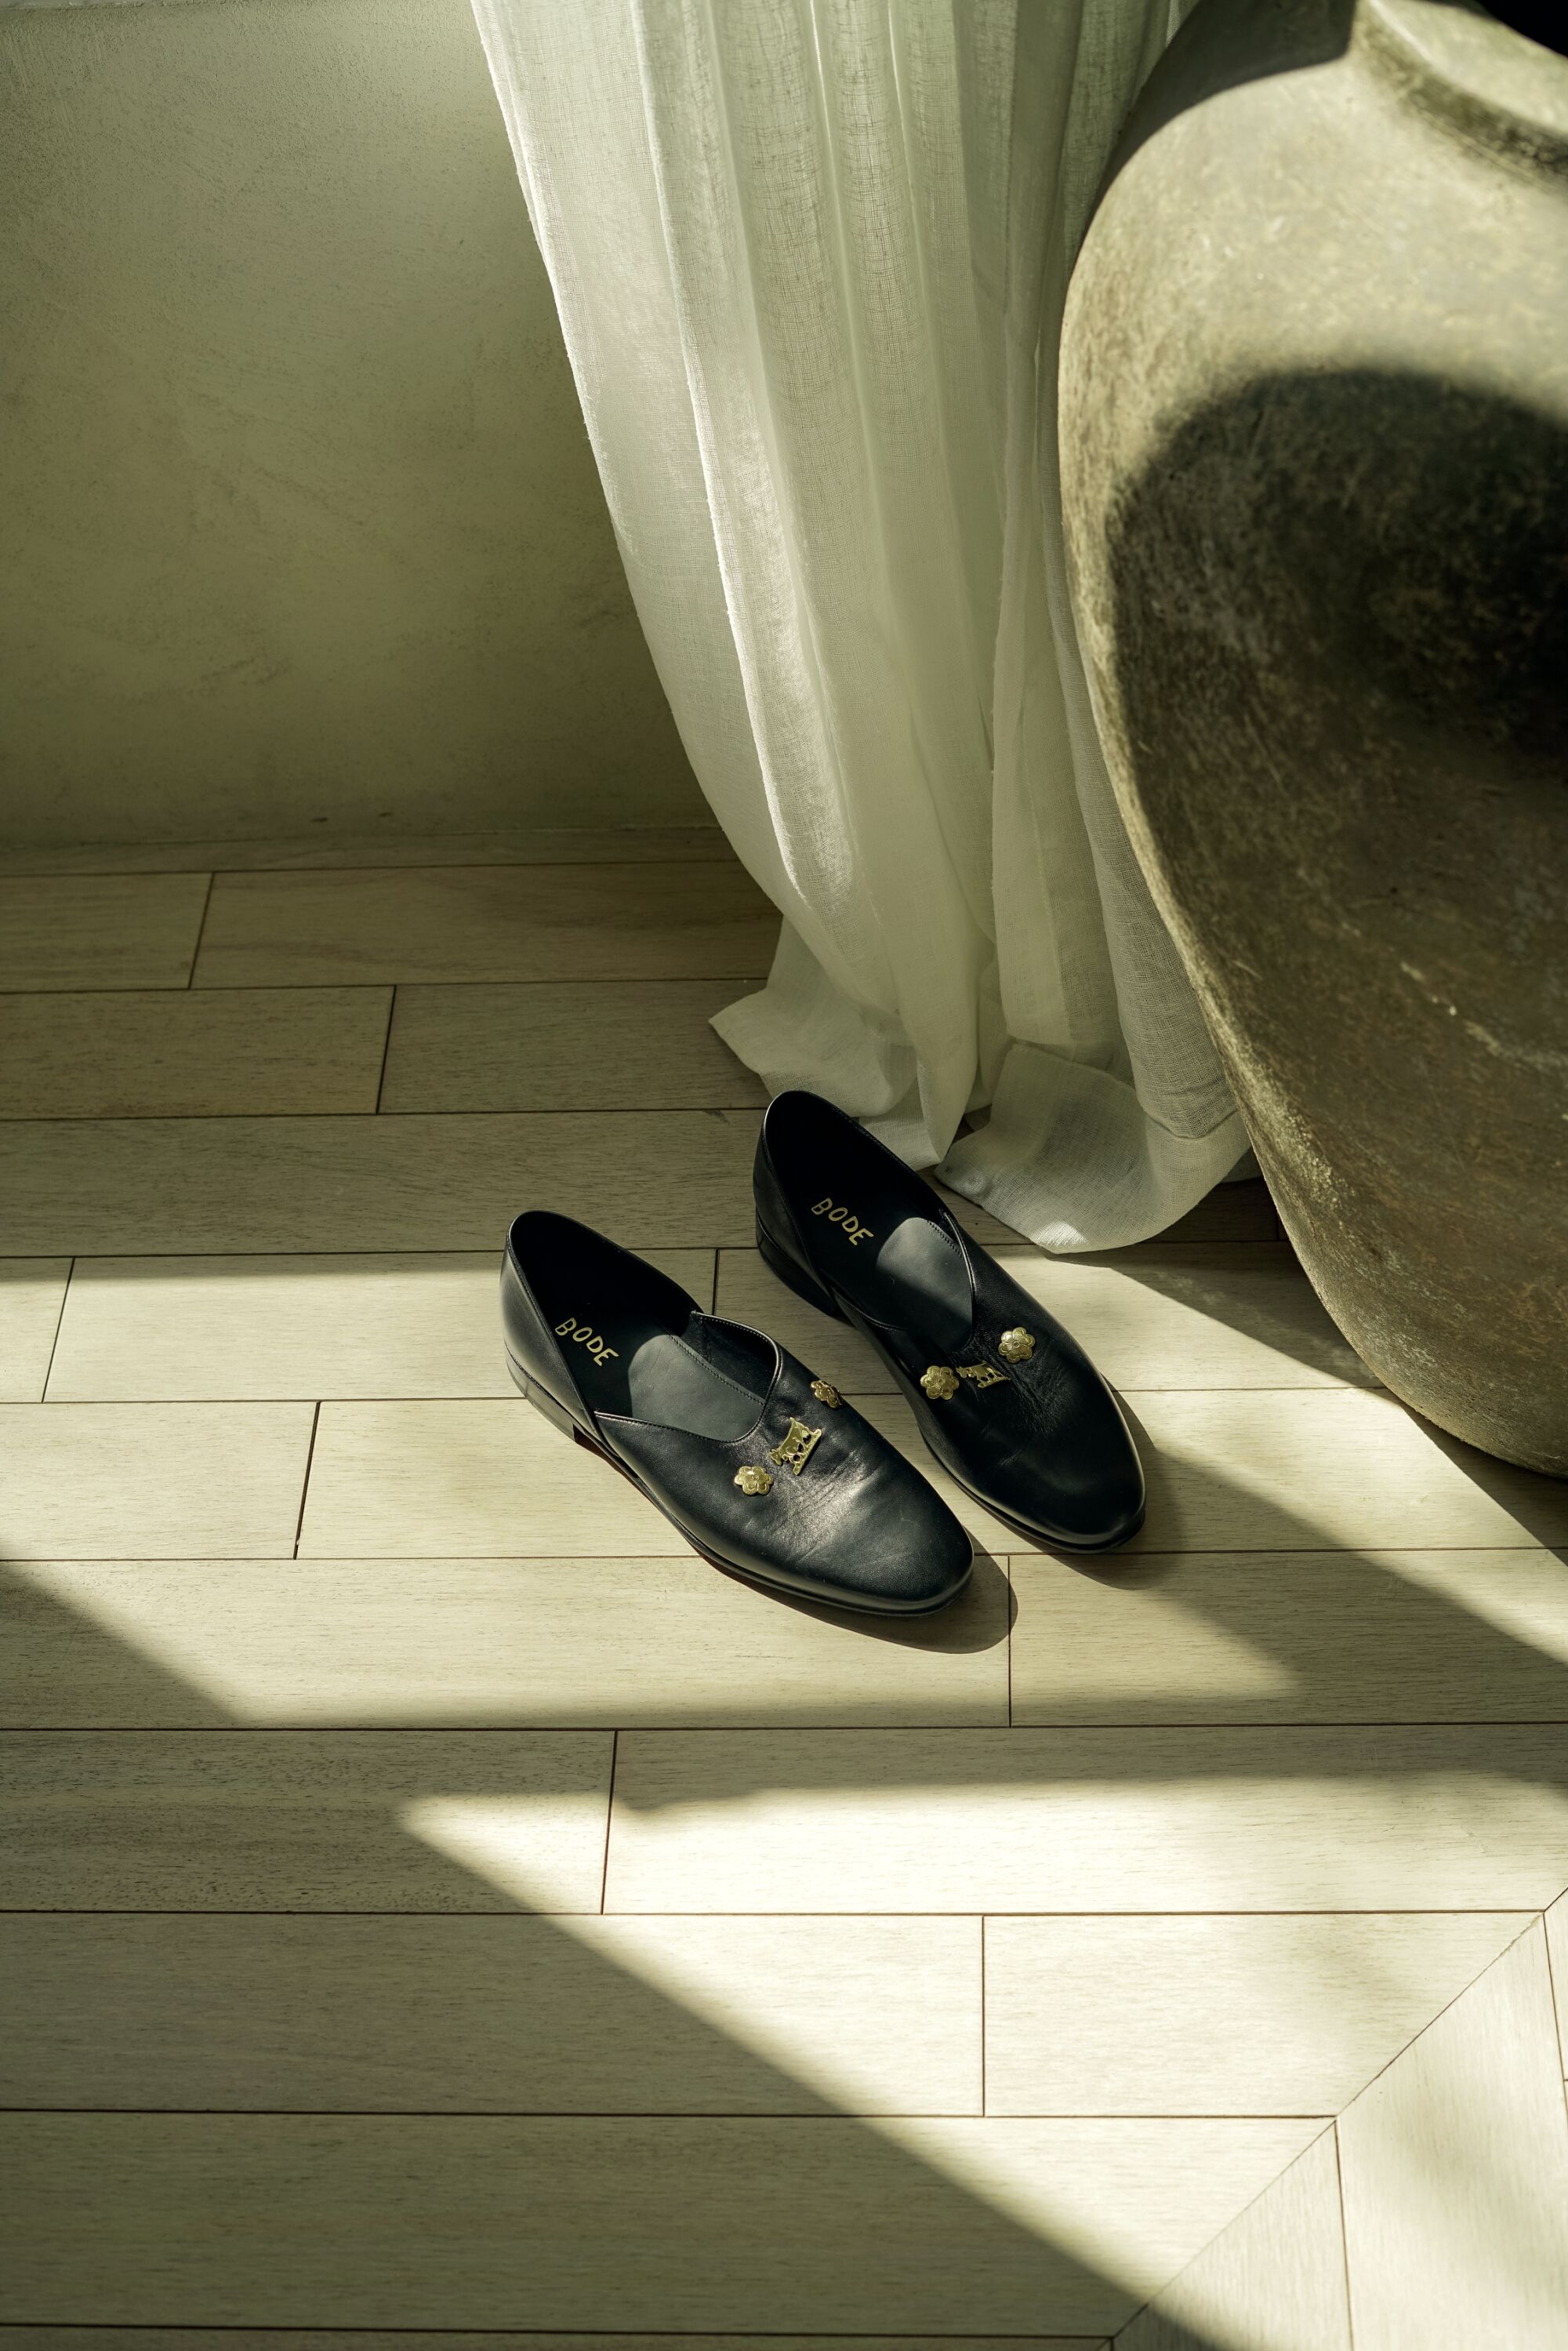 A pair of black house shoes in a home, bathed in soft light.